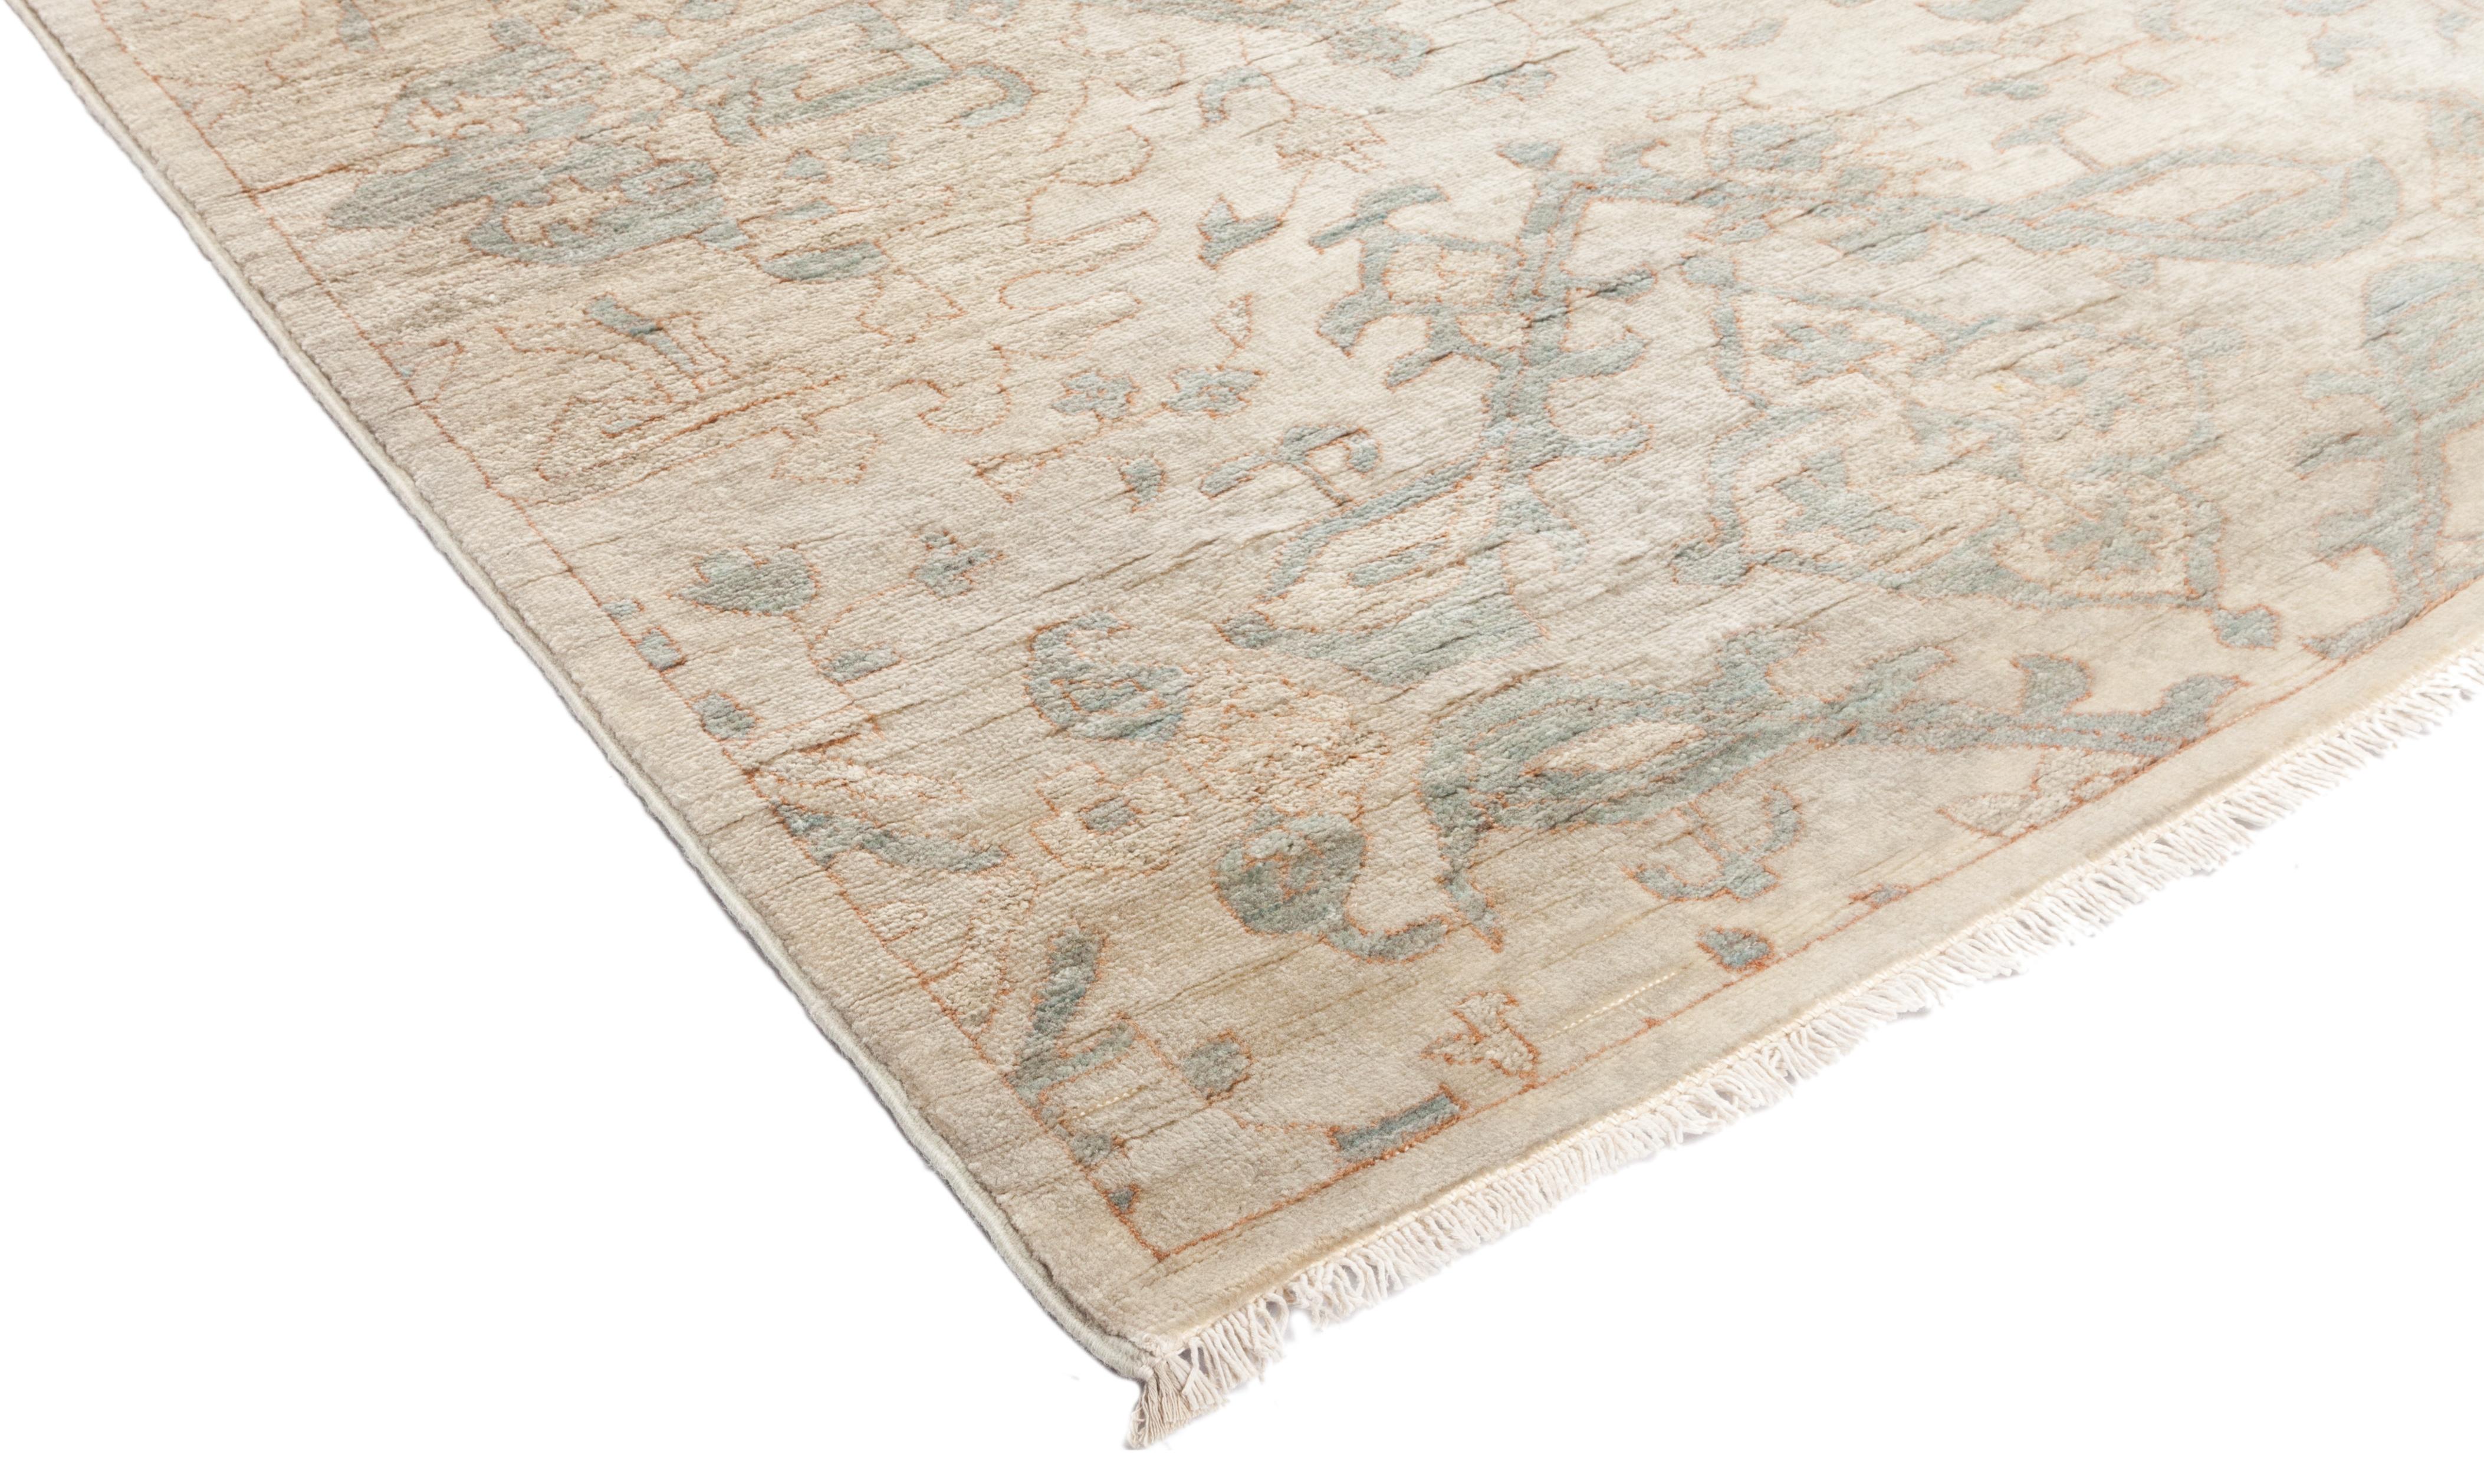 Color: Ivory, made in: Pakistan. 100% wool. The colorful collection epitomizes Classic with a twist: traditional patterns overdyed in brilliant color. Each hand knotted rug is washed in a 100%-natural botanical dye that reveals hidden nuances in the